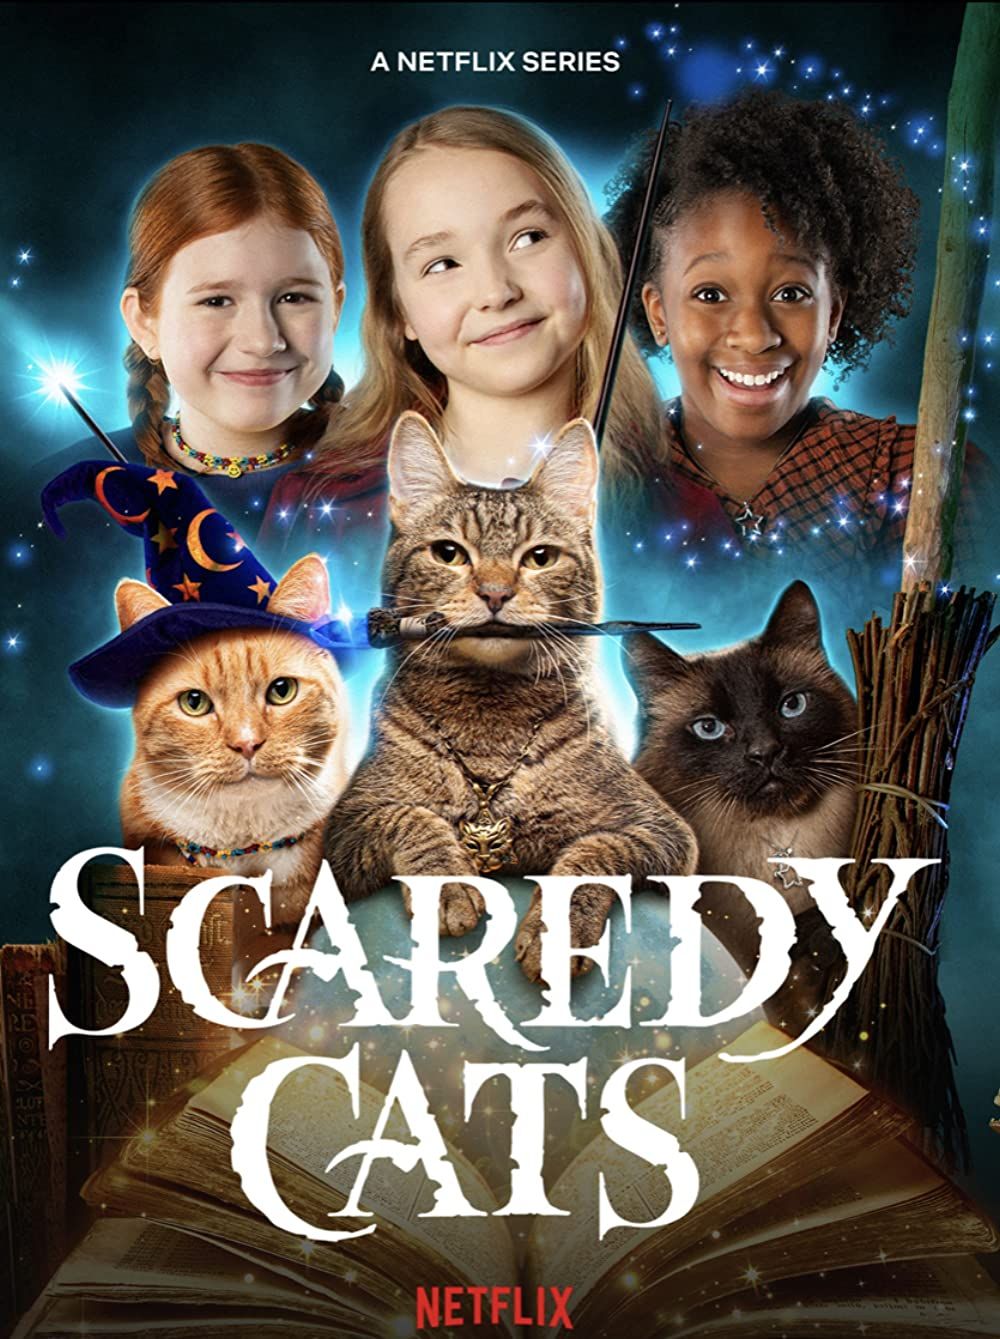 Scaredy Cats (2021) Season 1 Hindi Dubbed Complete NF Series download full movie